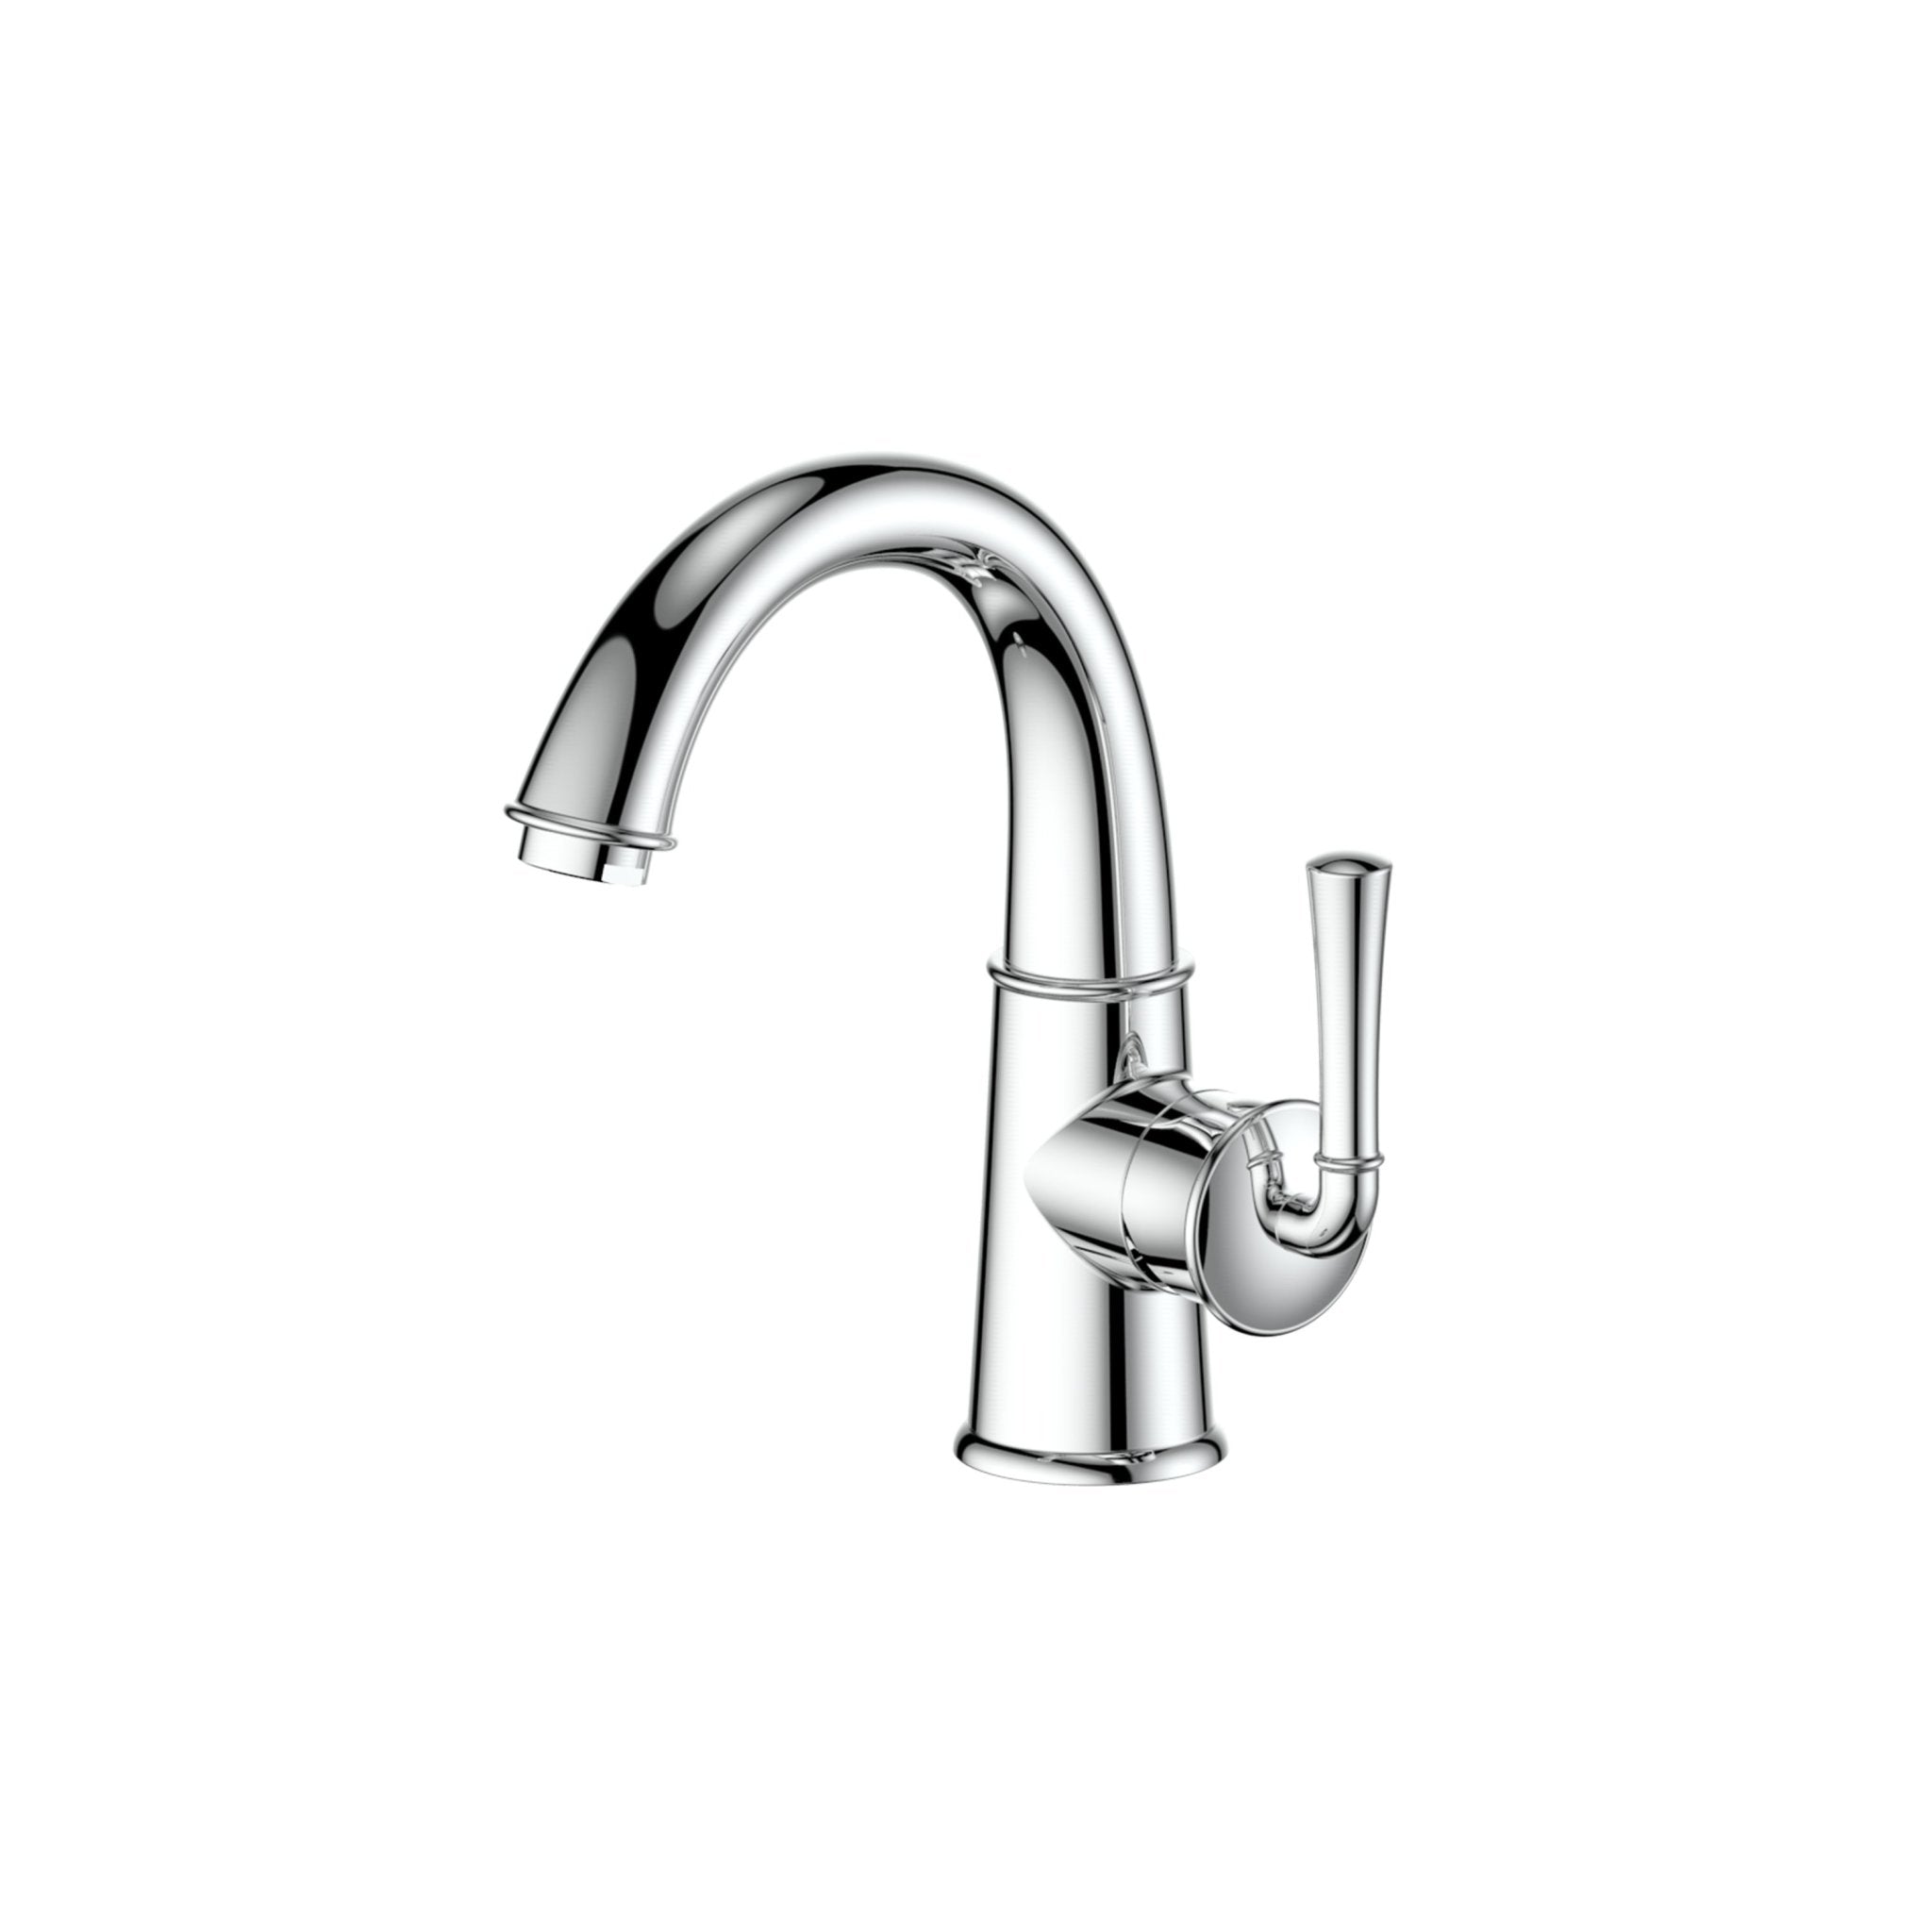 ZLINE Kitchen and Bath, ZLINE Olympic Valley Bath Faucet in Chrome (OLV-BF-CH), OLV-BF-CH,